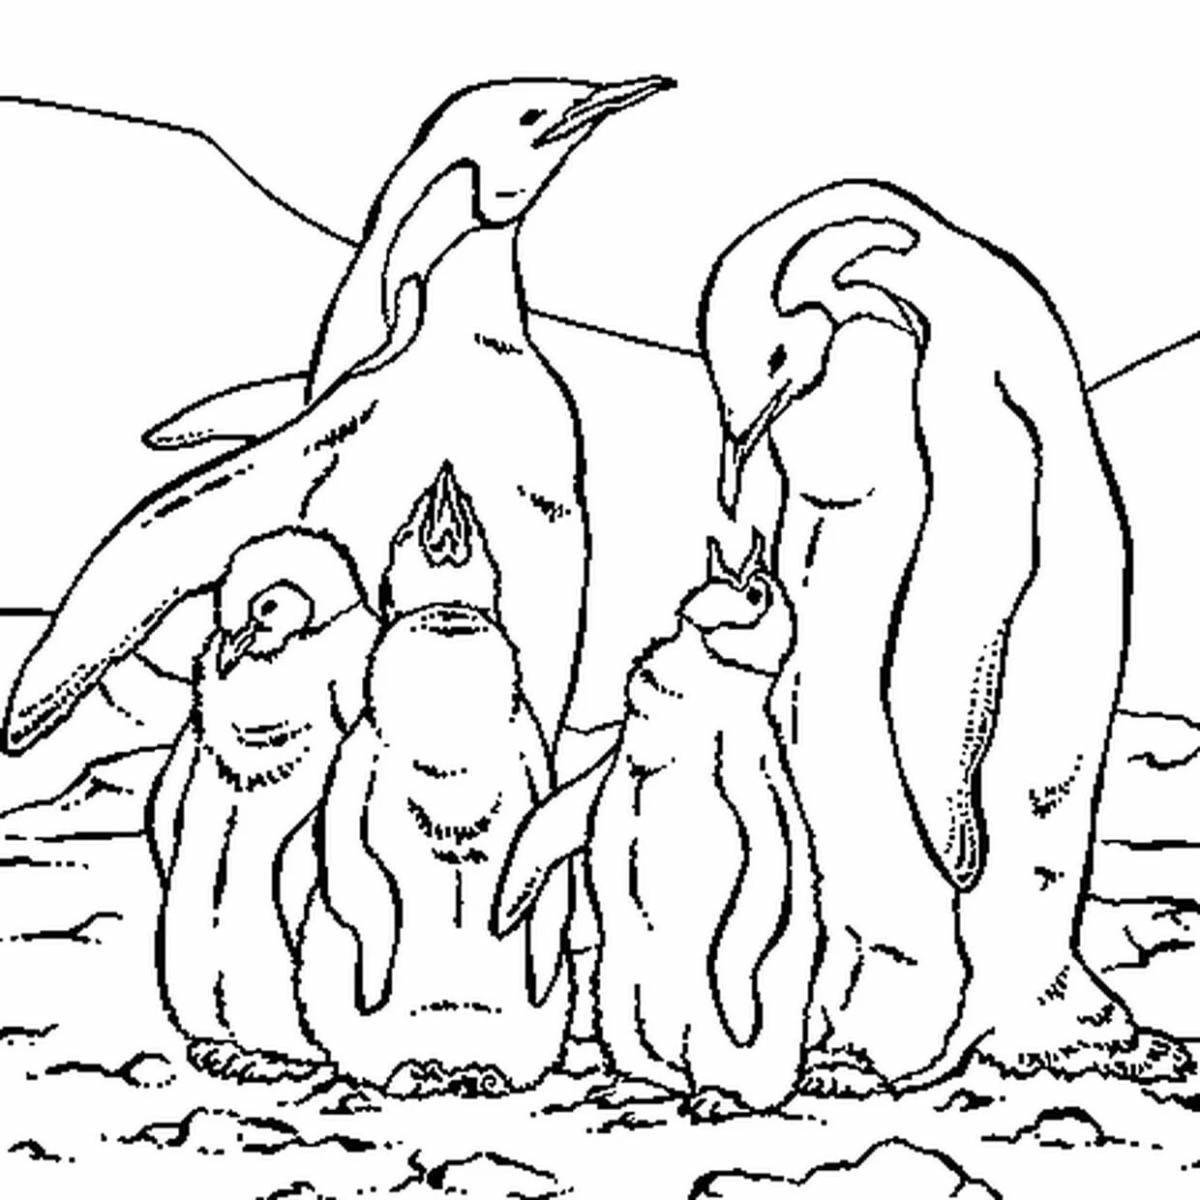 Adorable penguin family coloring page